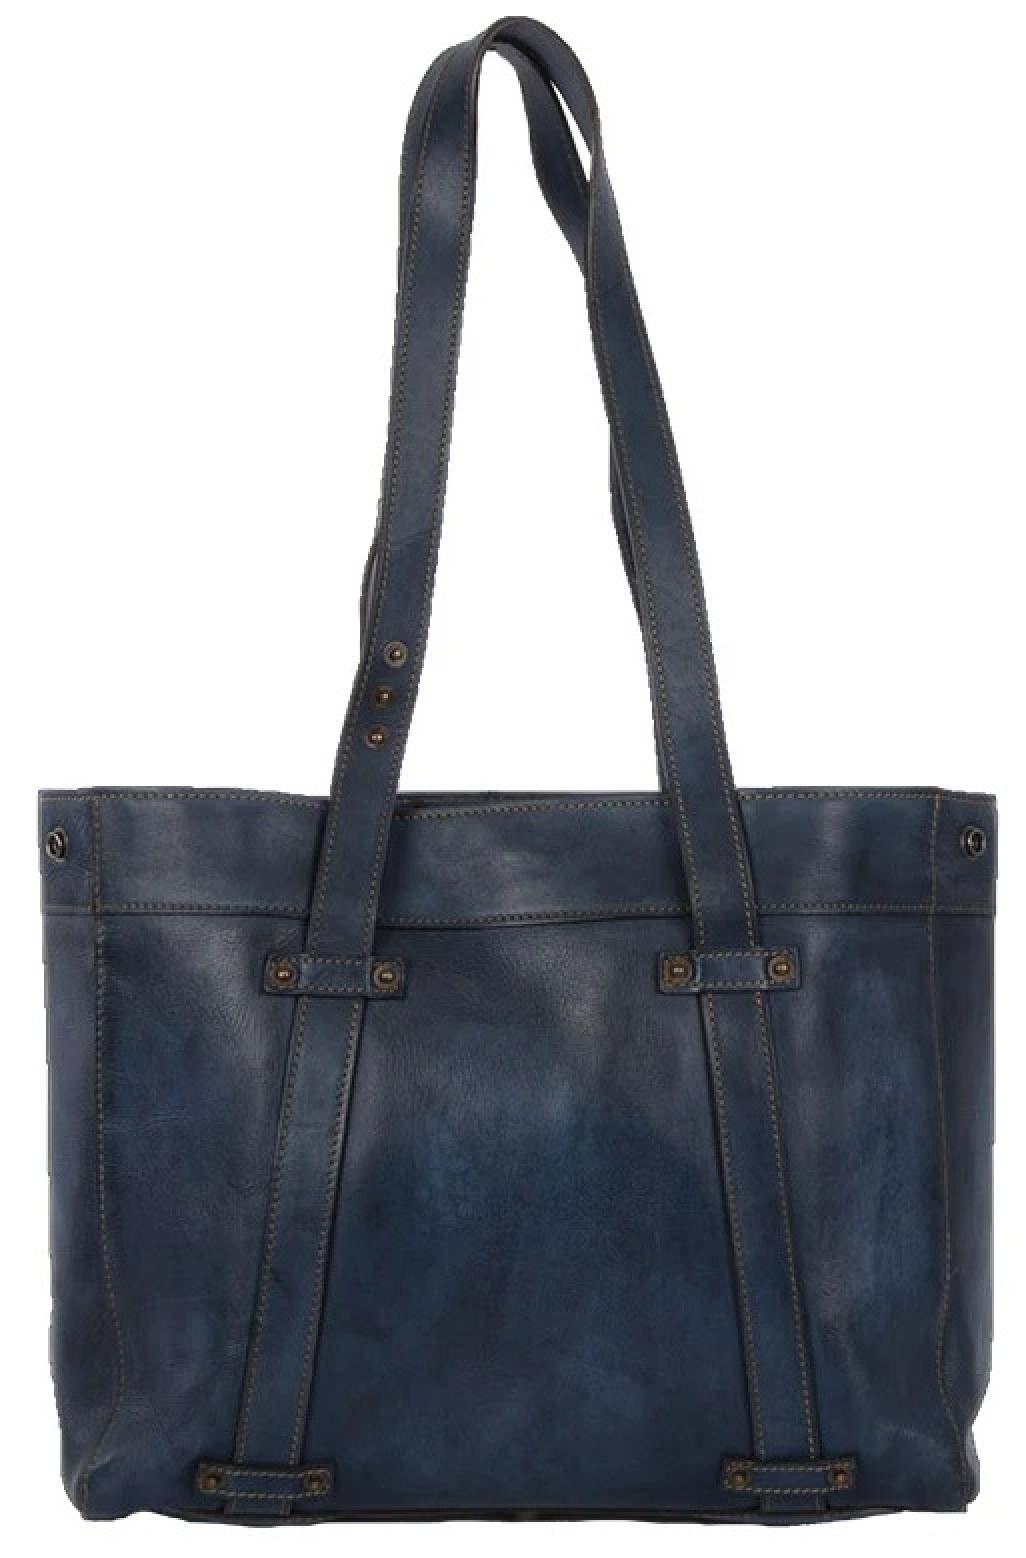 STS Ranchwear Denim Leather Small Tote